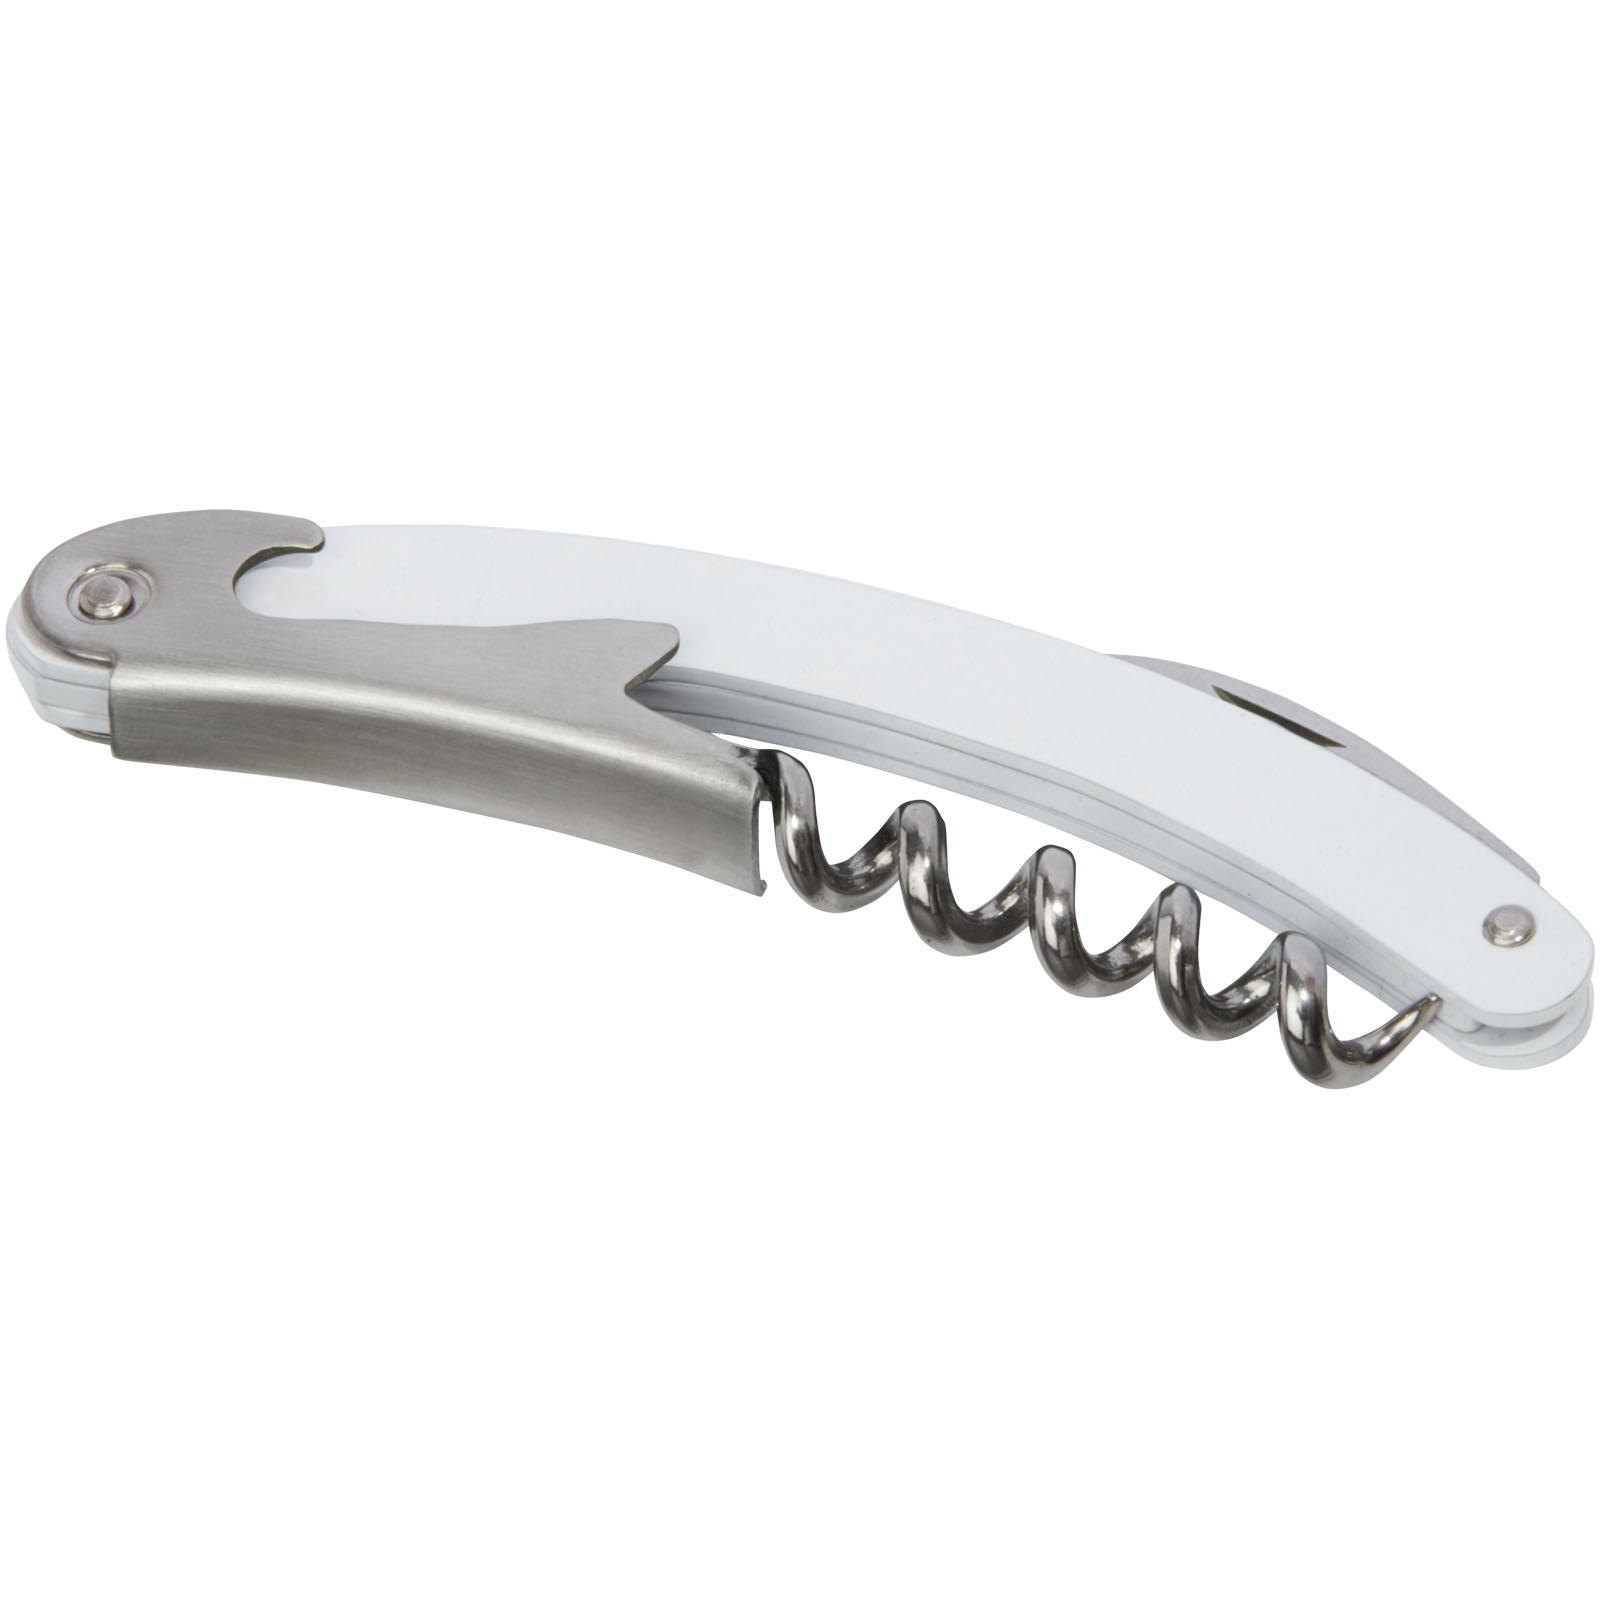 Stainless Steel Waitress Knife - Exhall